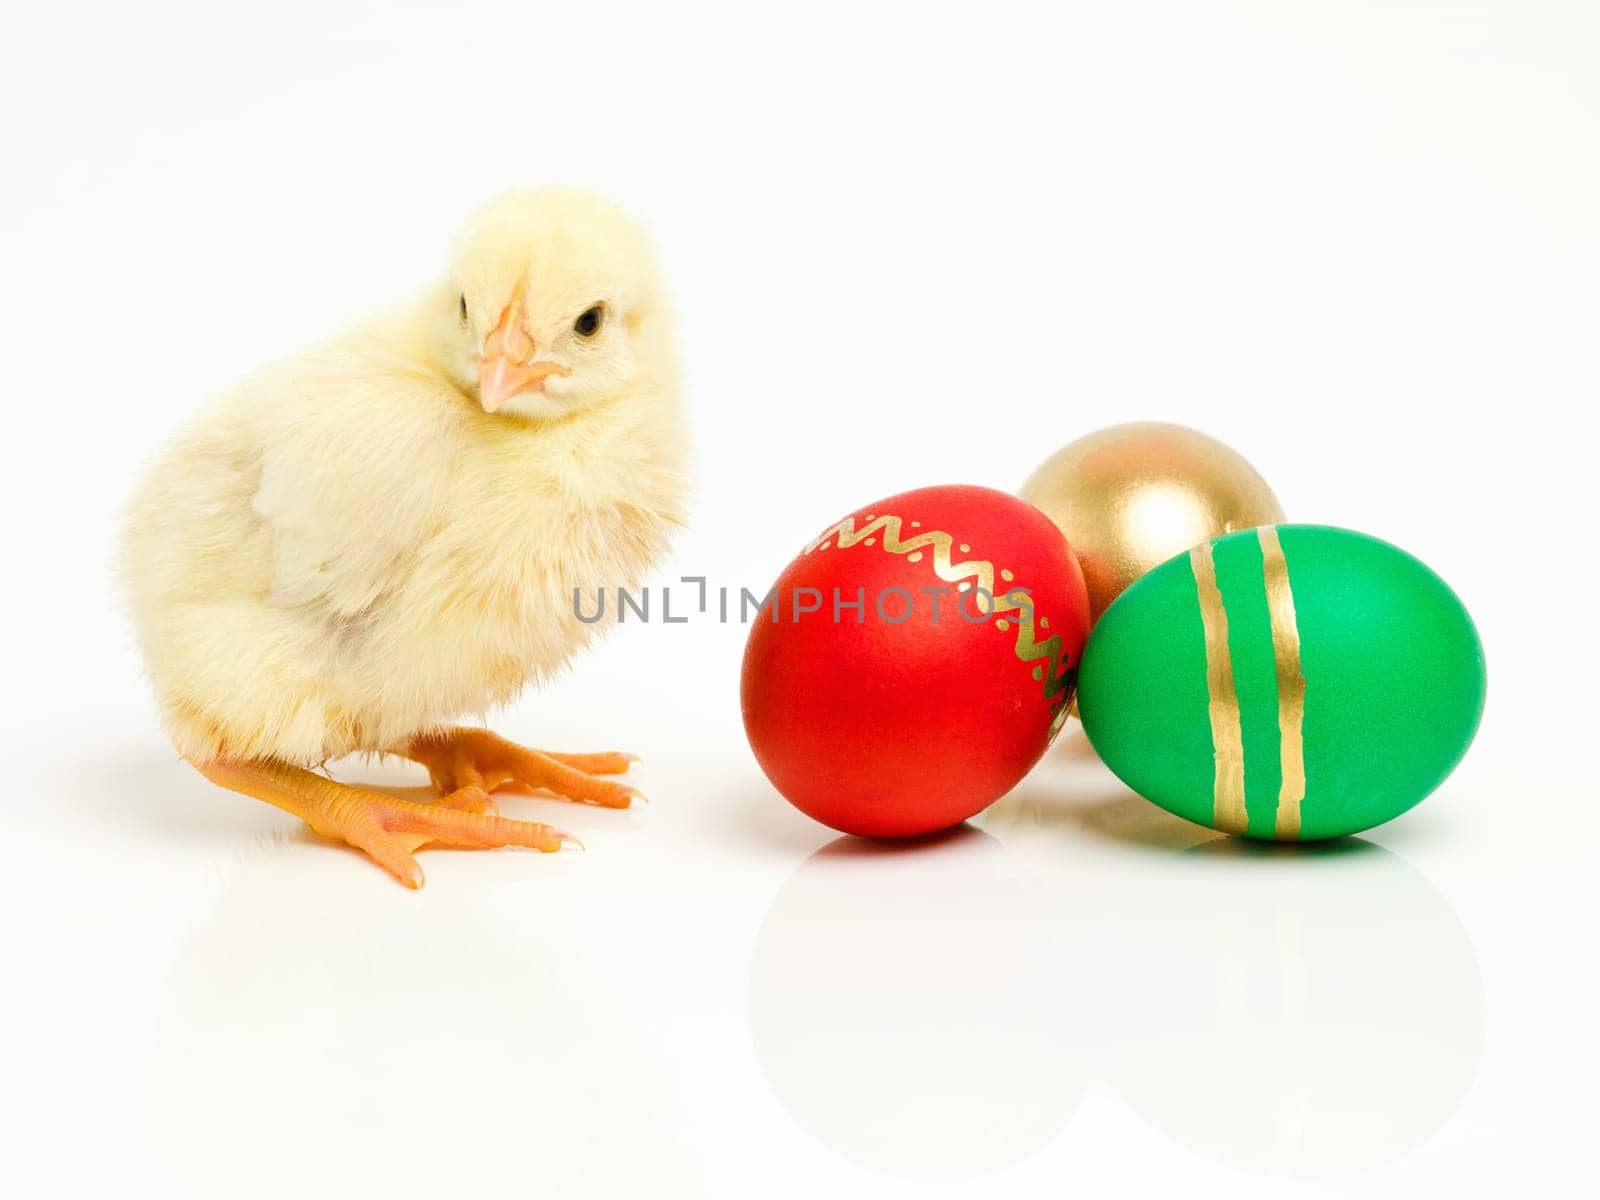 Chick, easter and chocolate eggs or sweets dessert on holiday for festive celebration, shell or traditional. Animal, young and unhealthy snack in studio white background for vacation, season or candy by YuriArcurs